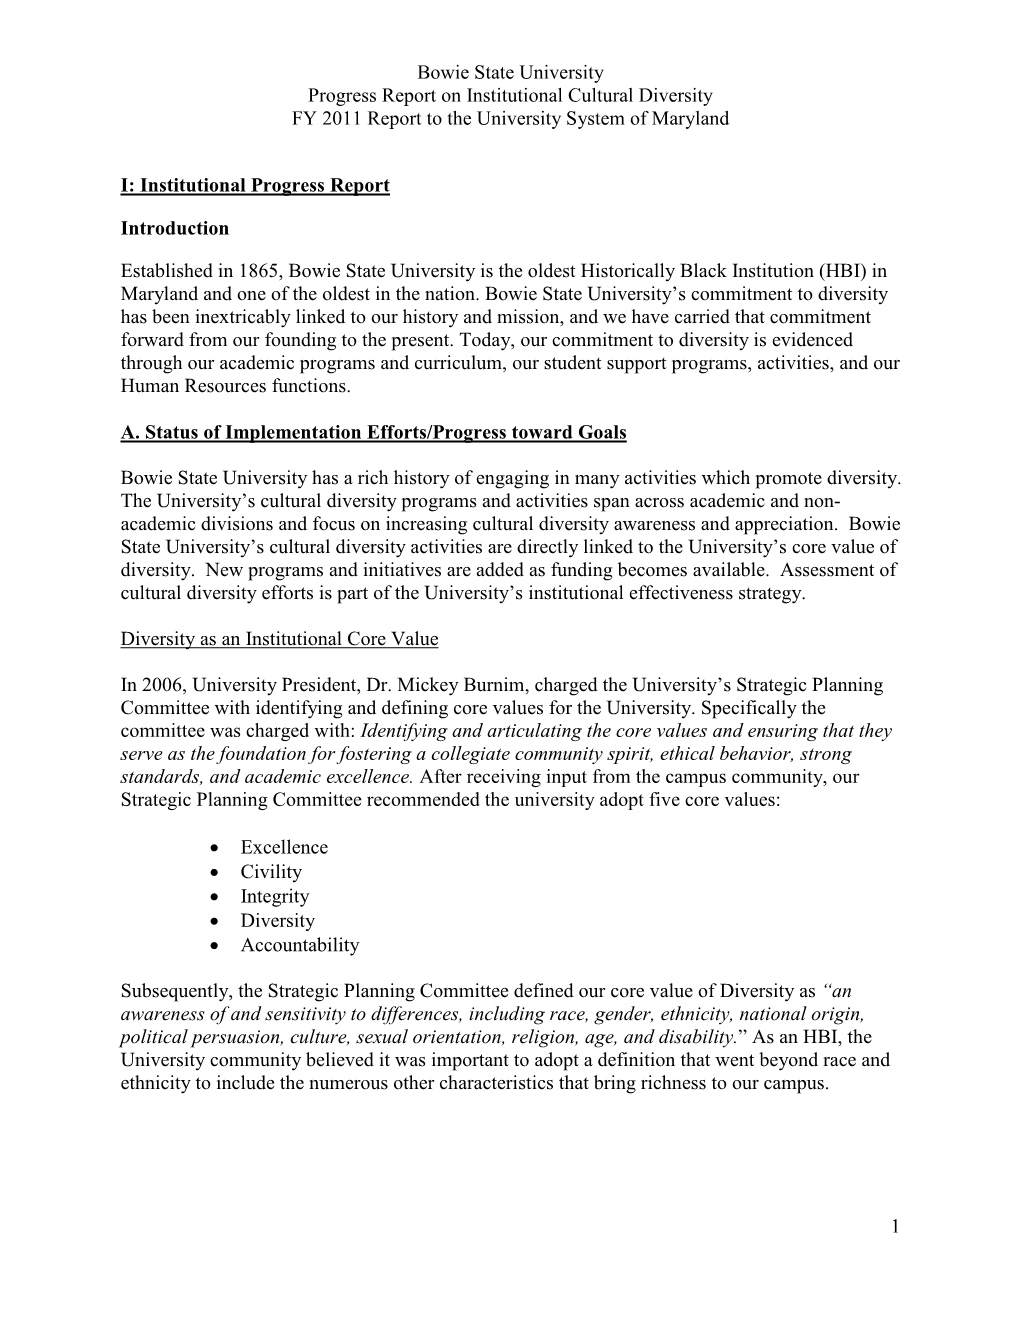 Bowie State University Progress Report on Institutional Cultural Diversity FY 2011 Report to the University System of Maryland